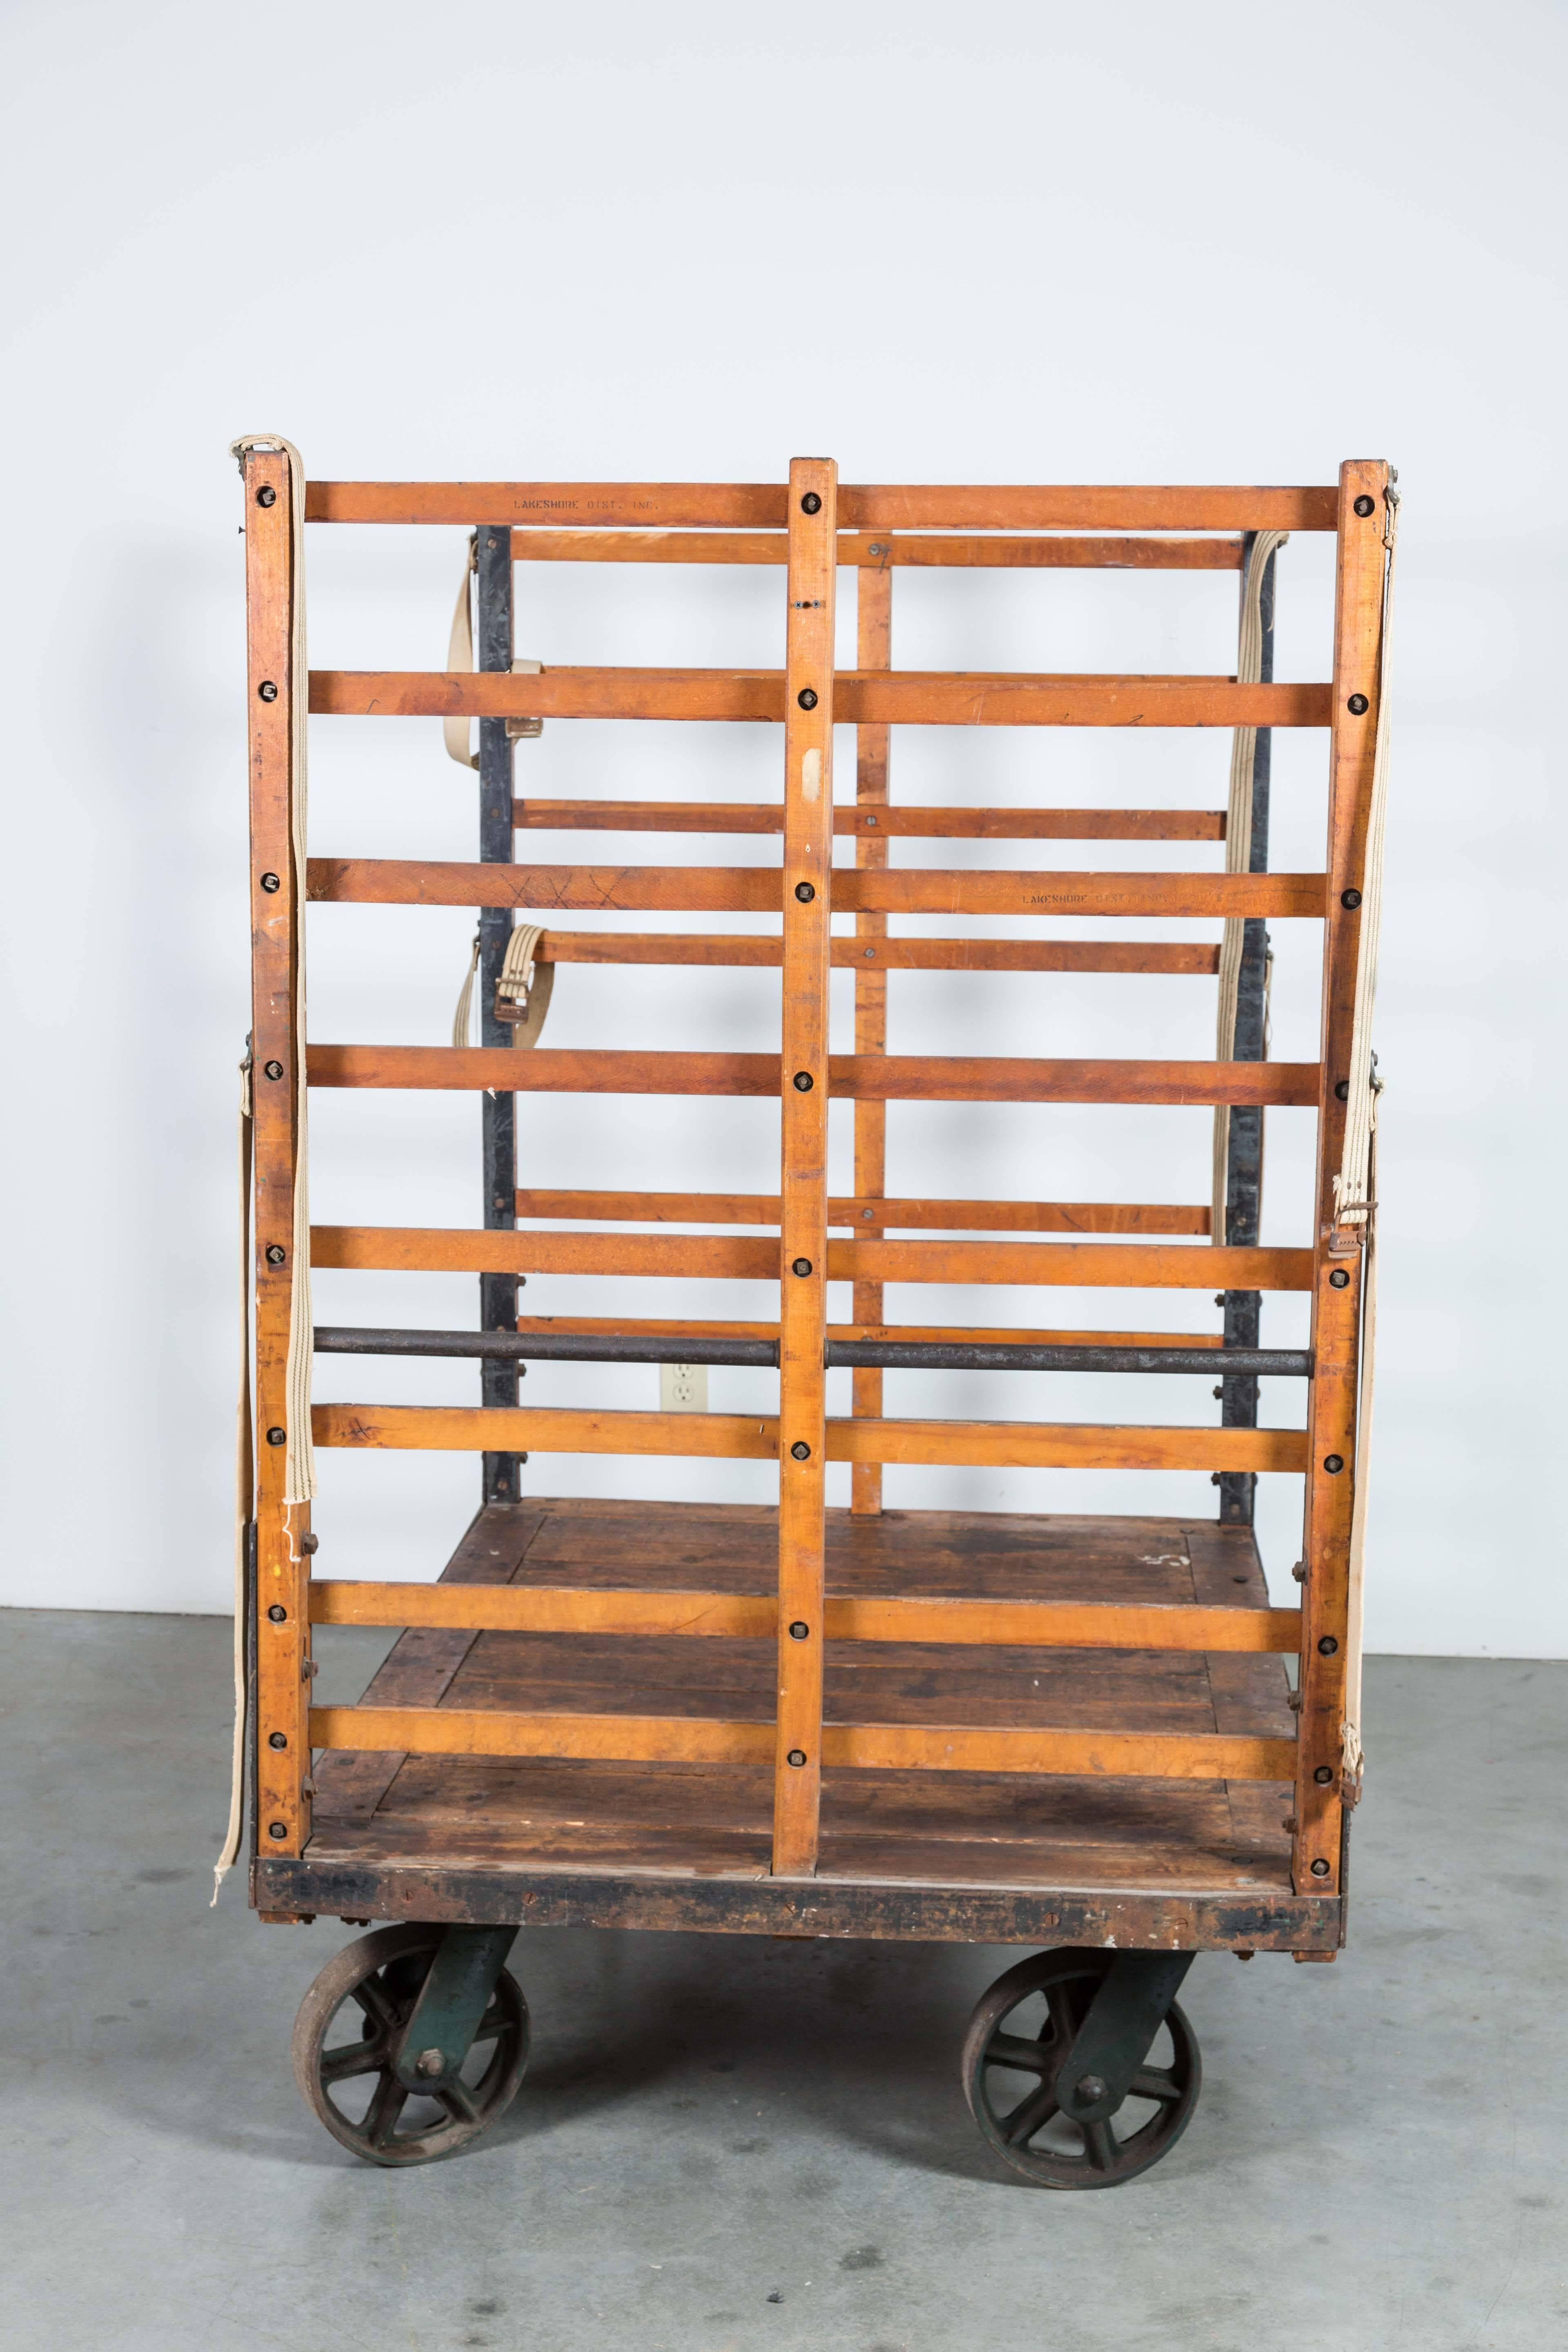 Late 19th century substantial luggage cart from a Midwestern United States train station. Cart moves on four cast iron casters. Wood slats with riveted fabric straps. Stenciled with cart numbers and train station info. Found at Union Station in